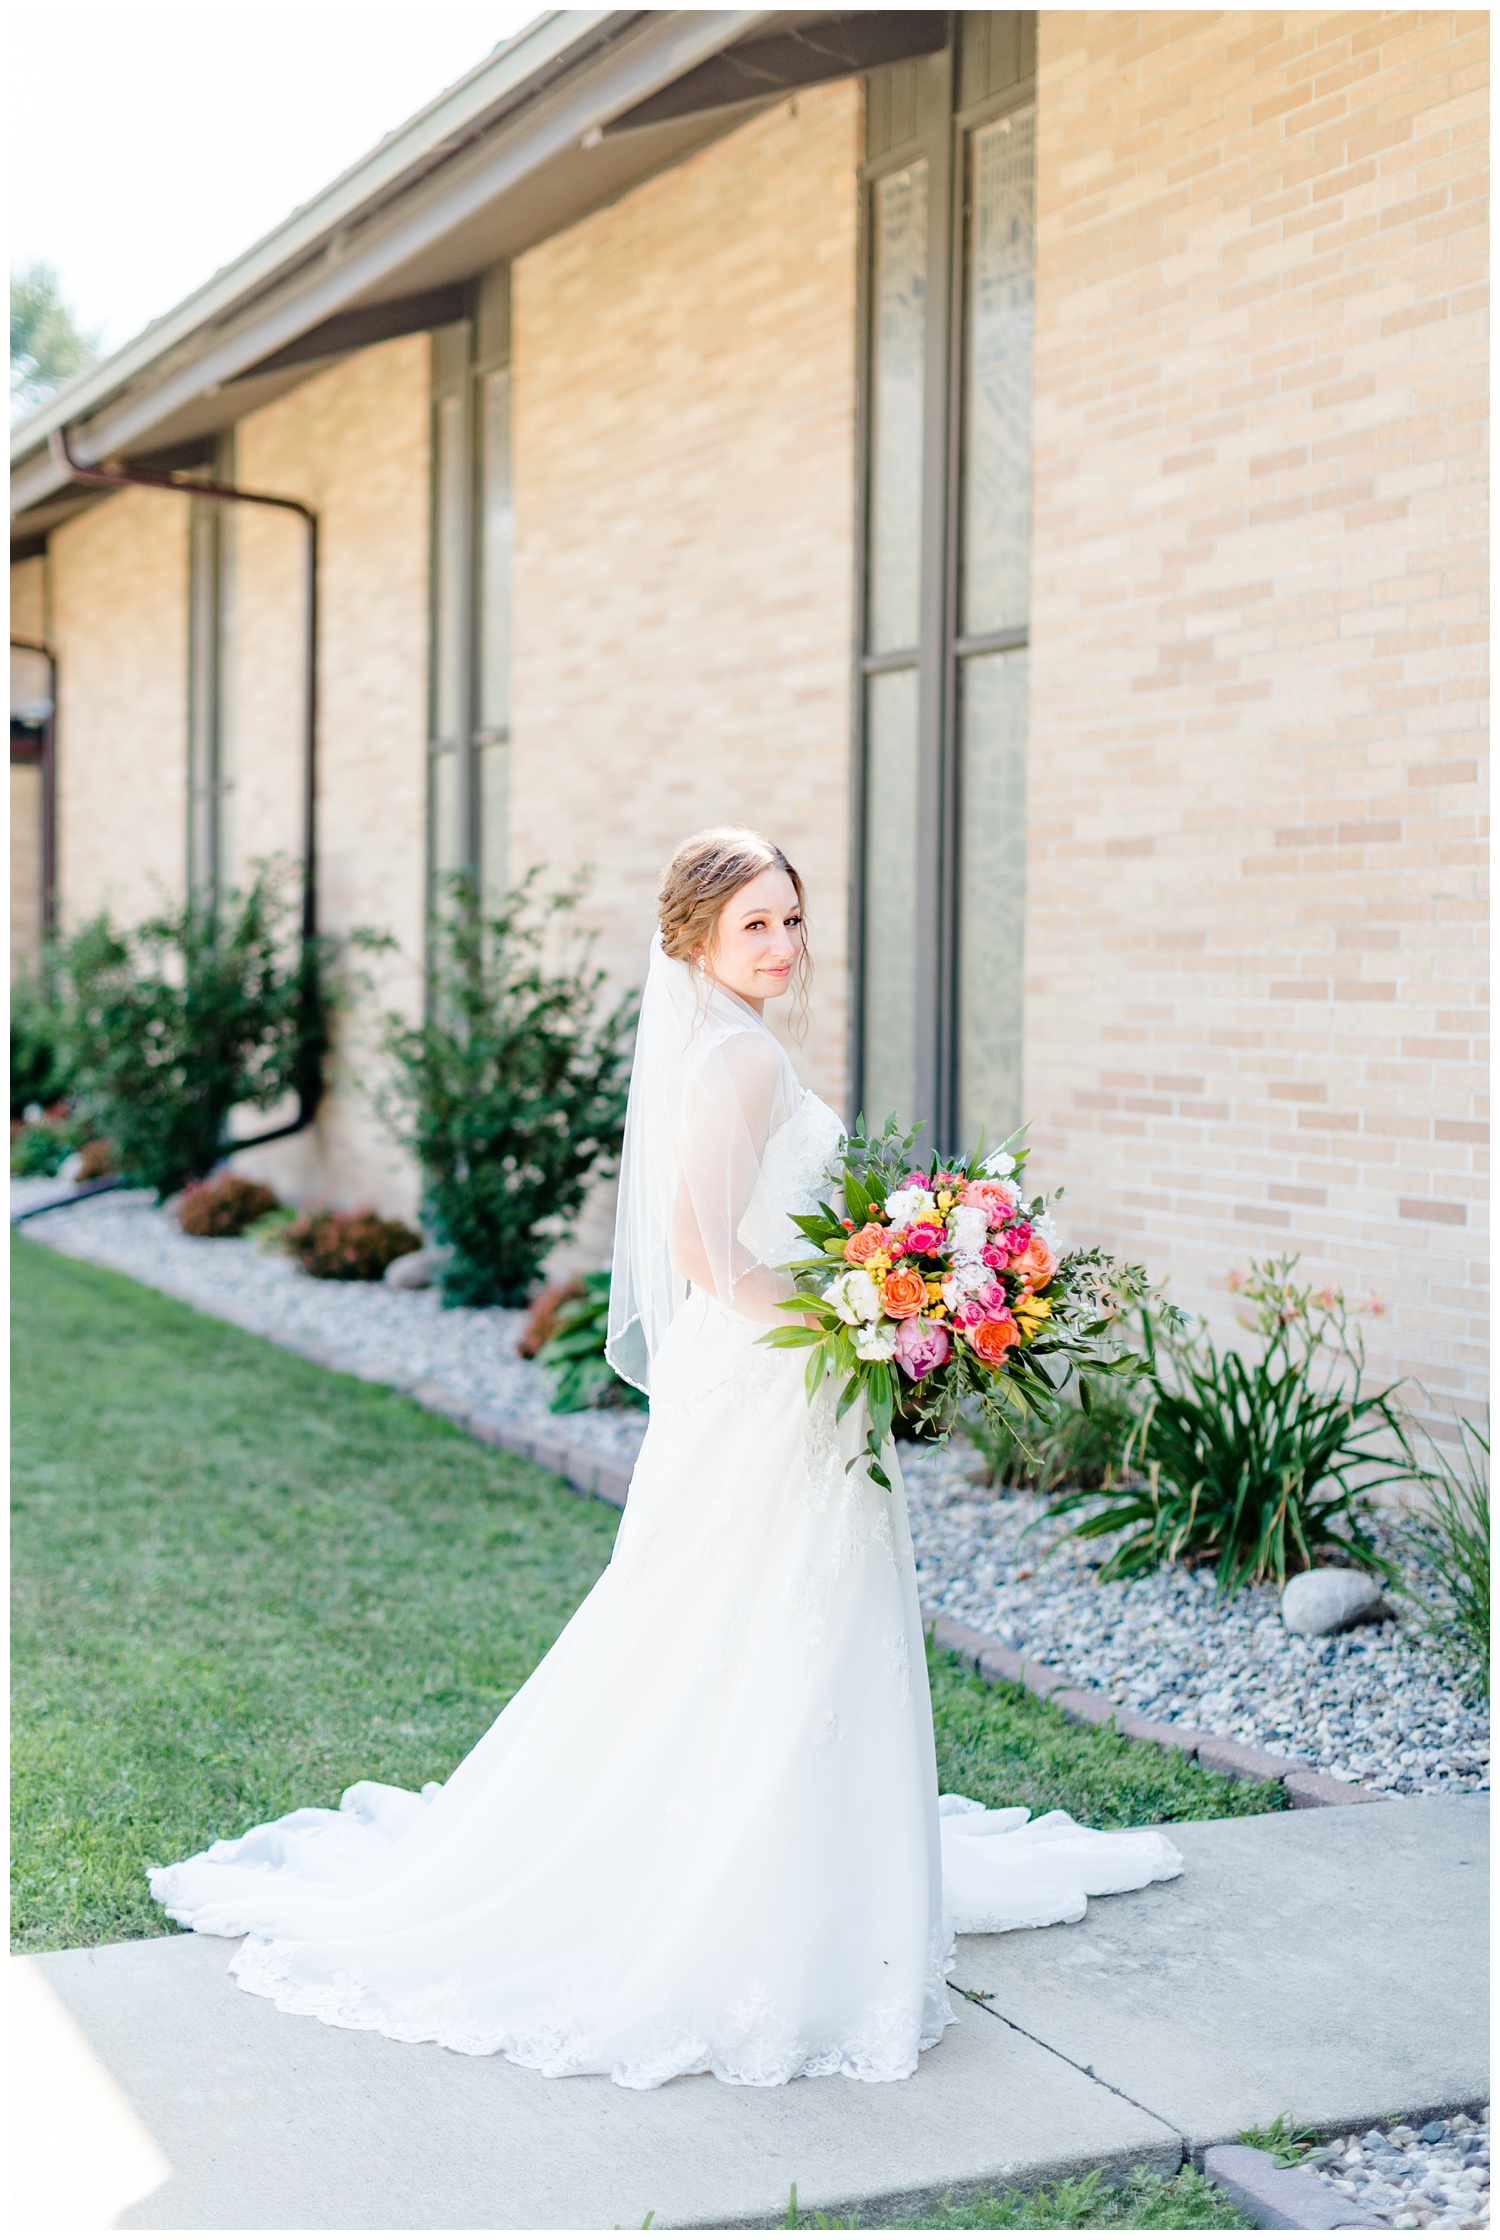 The beautiful bride, Leslie, stands poised in front of the Nazareth Lutheran Church in Armstrong, IA | CB Studio